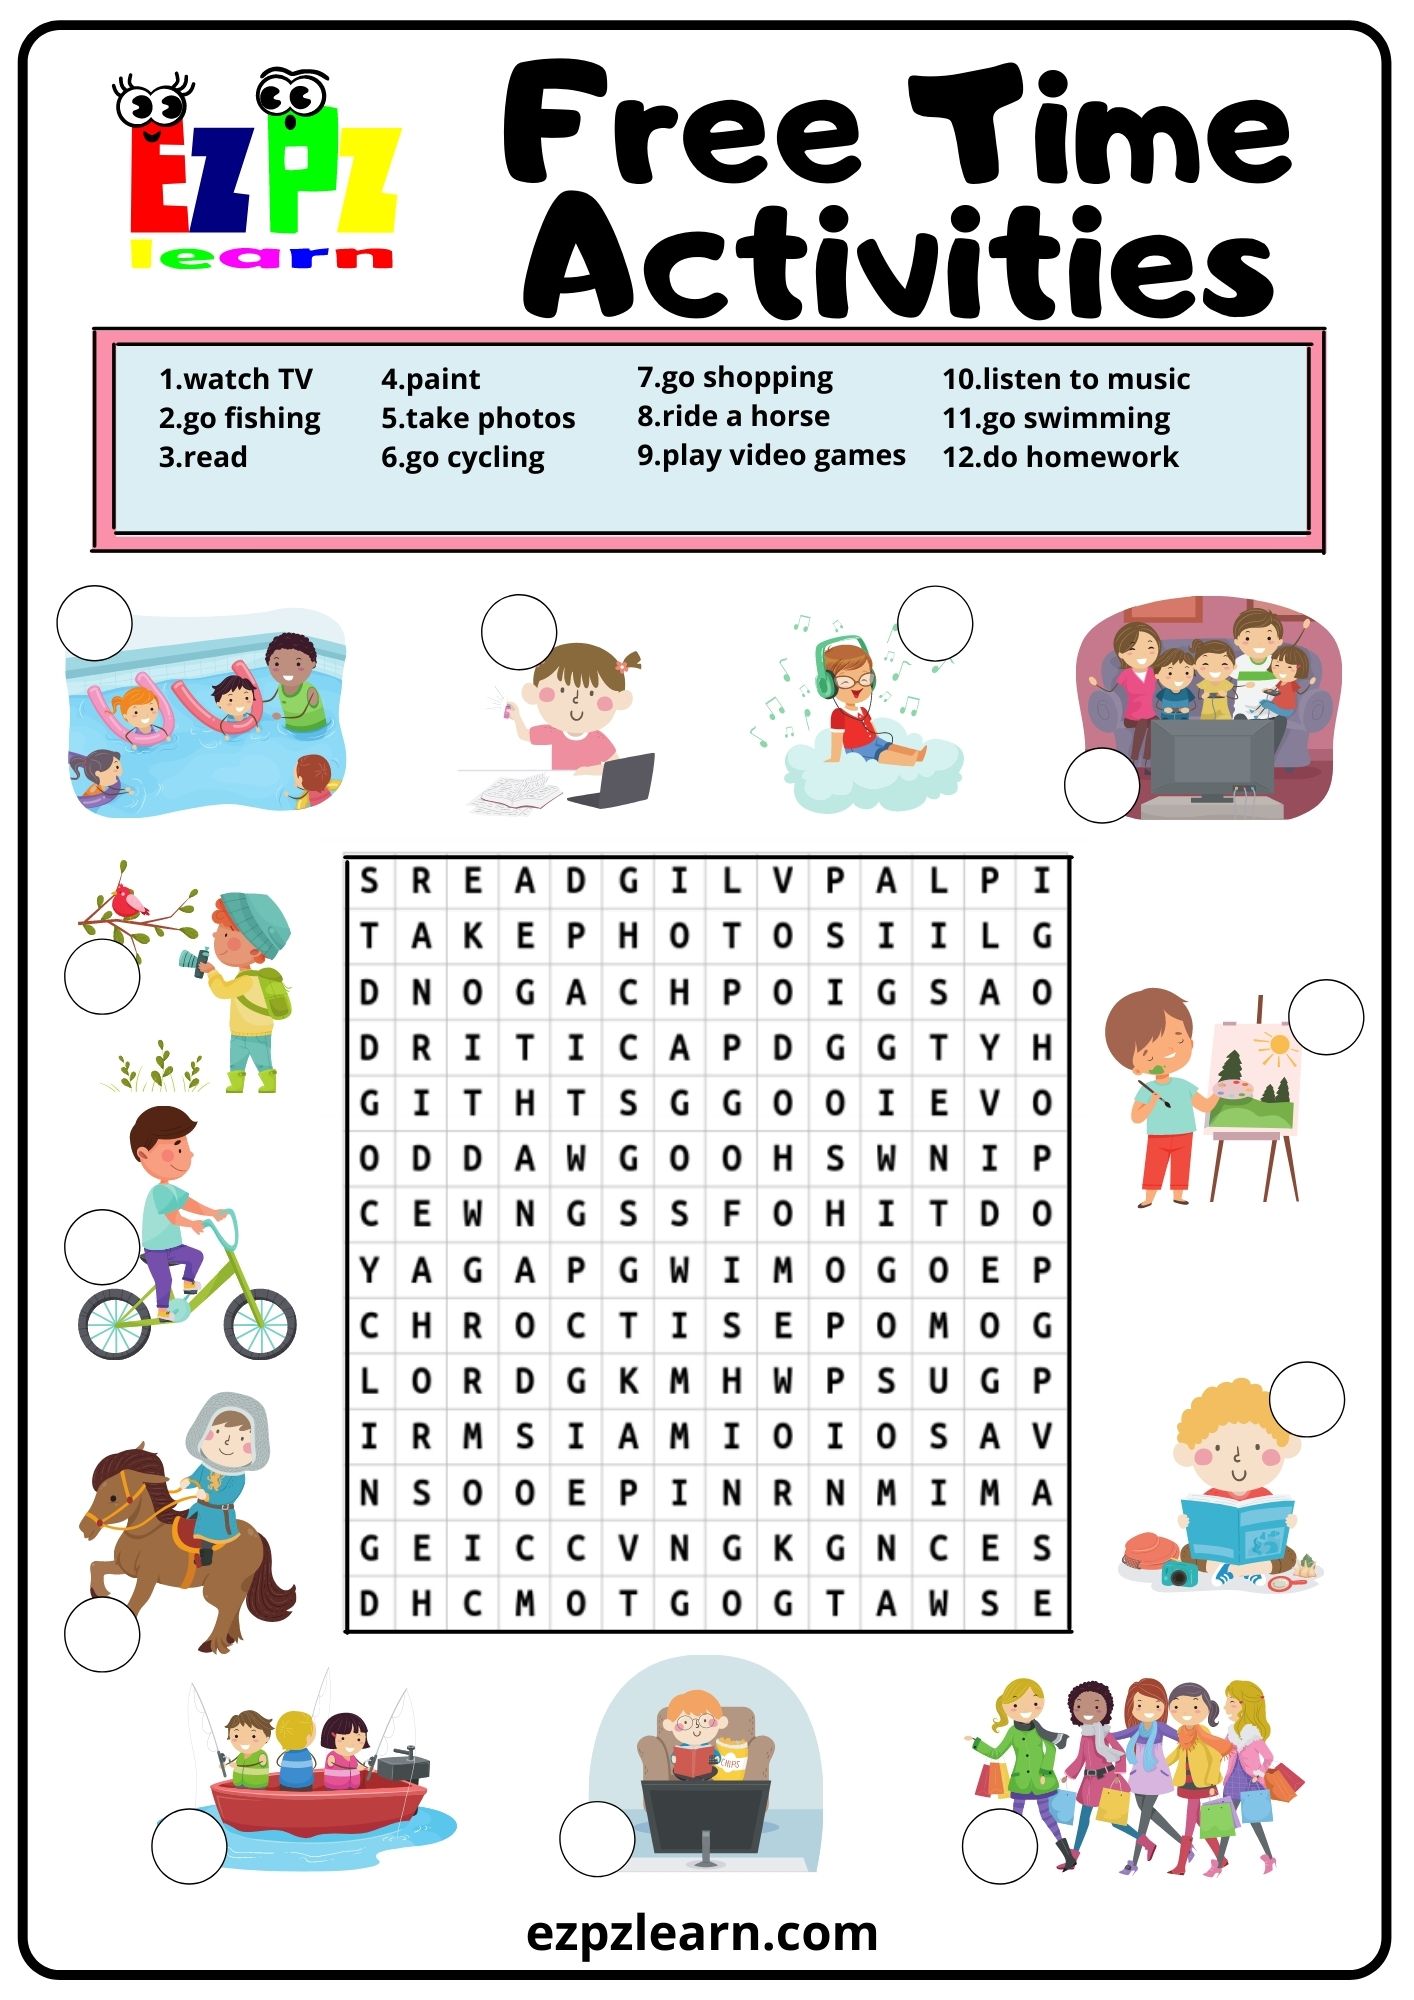 Free Time Activities Word Search 2 